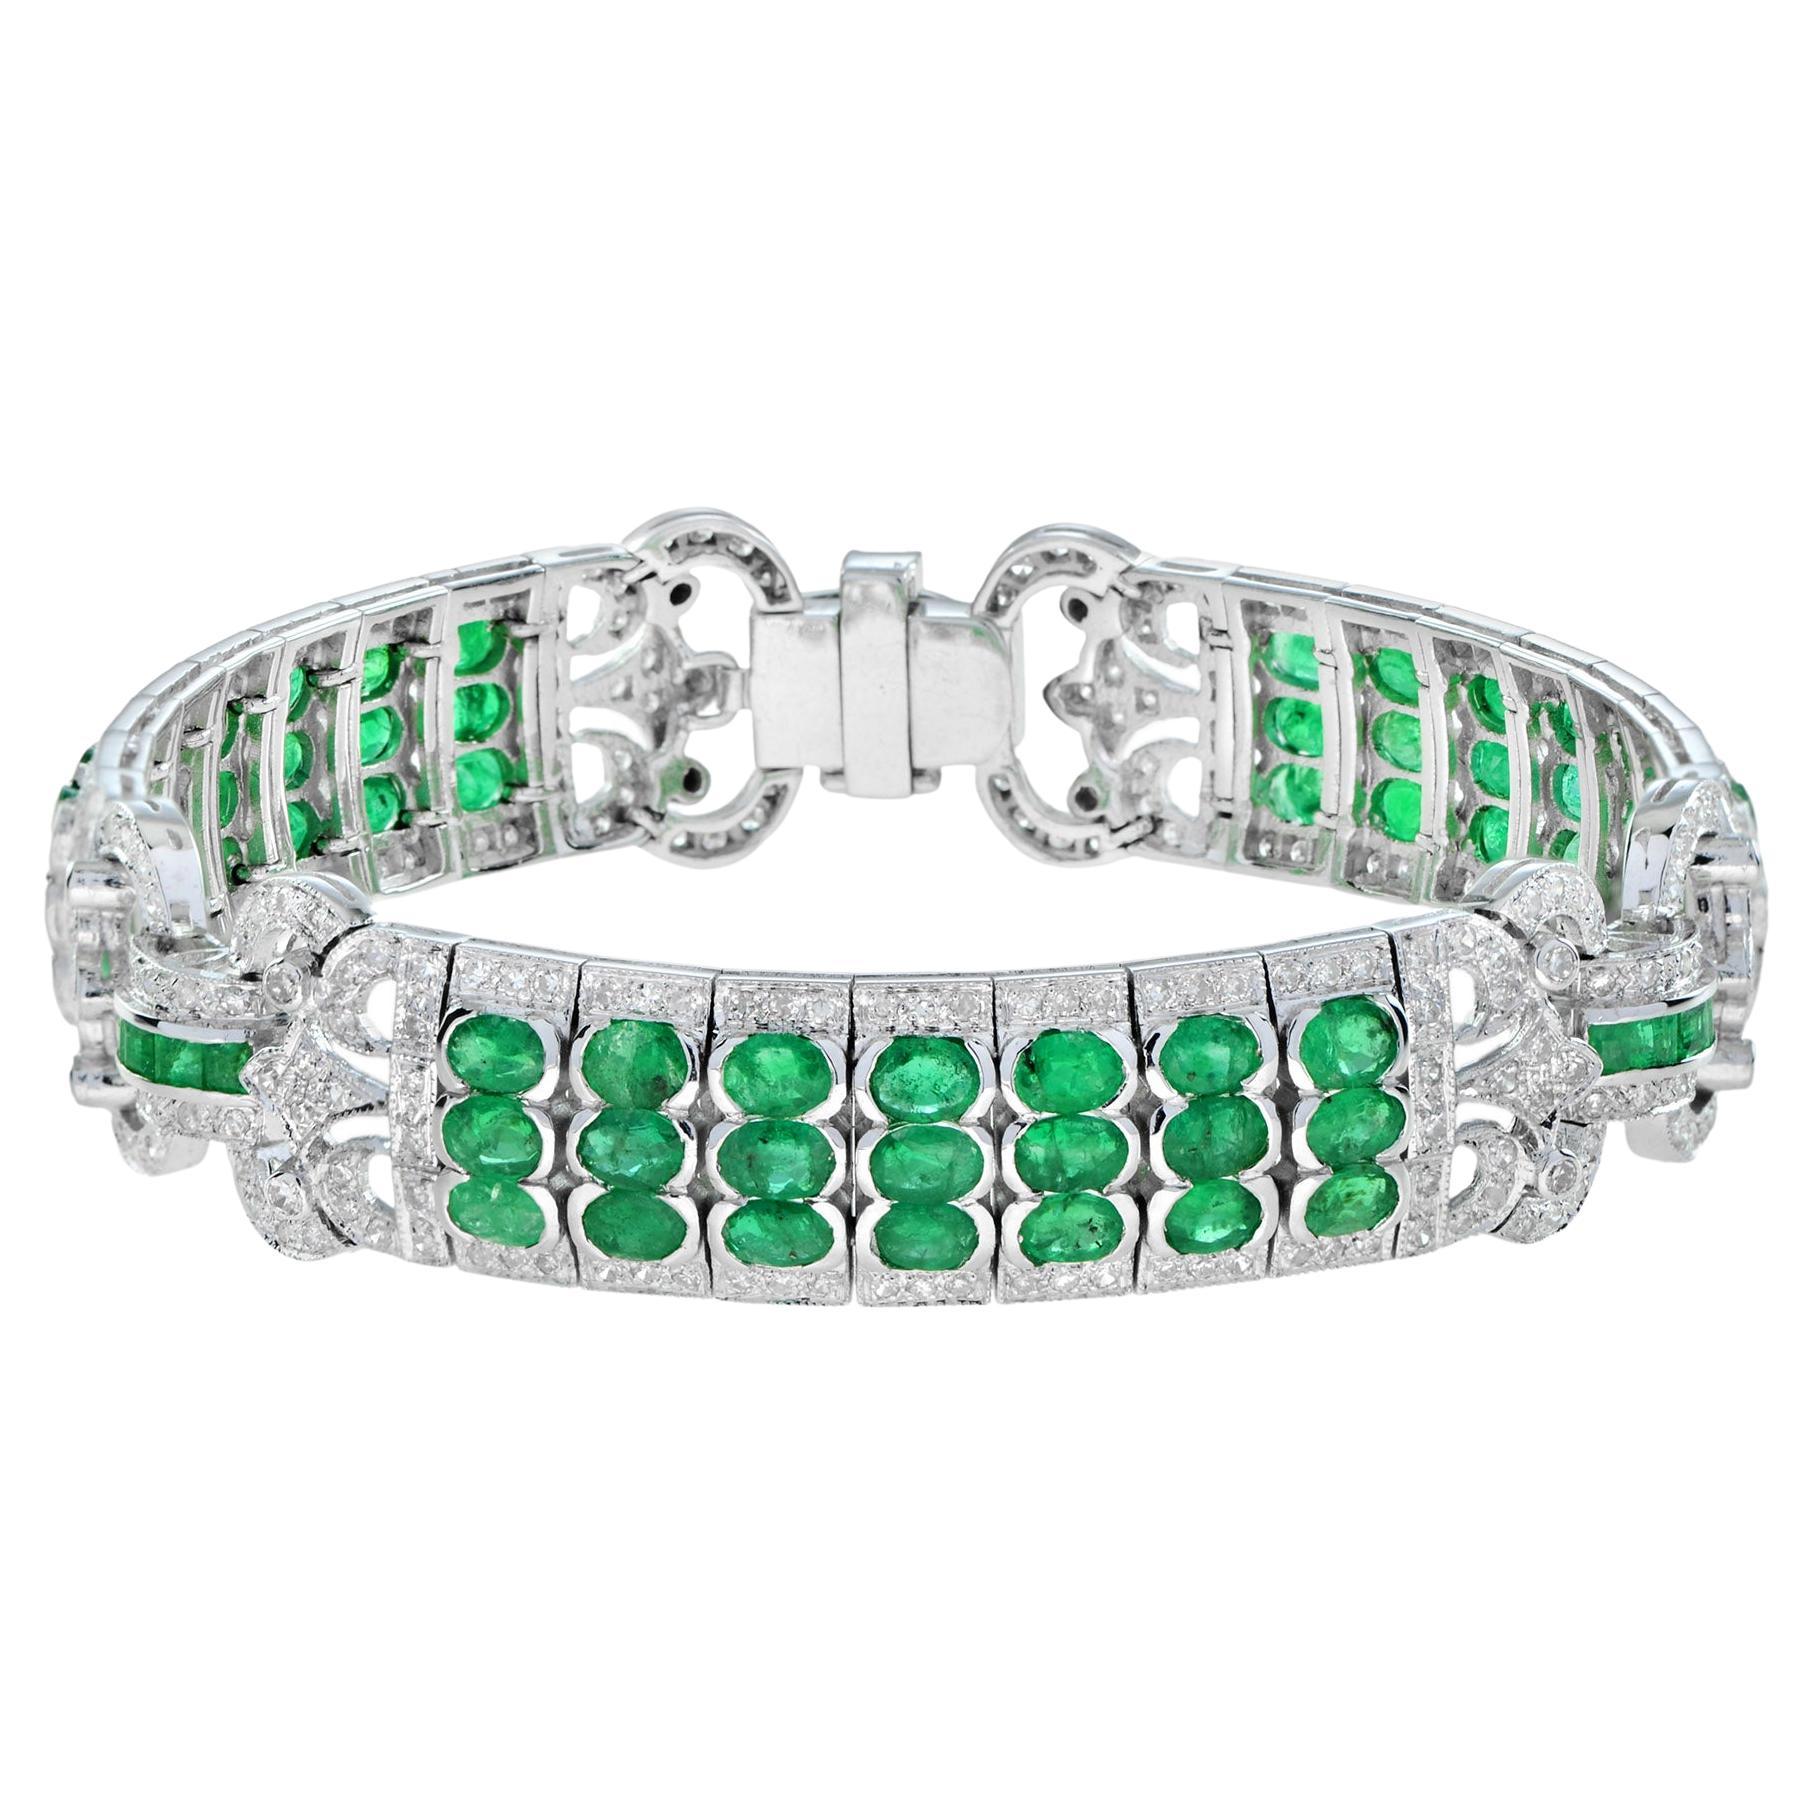 Art Deco Style 12.89 Ct. Emerald and Diamond Link Bracelet in 18K White Gold For Sale